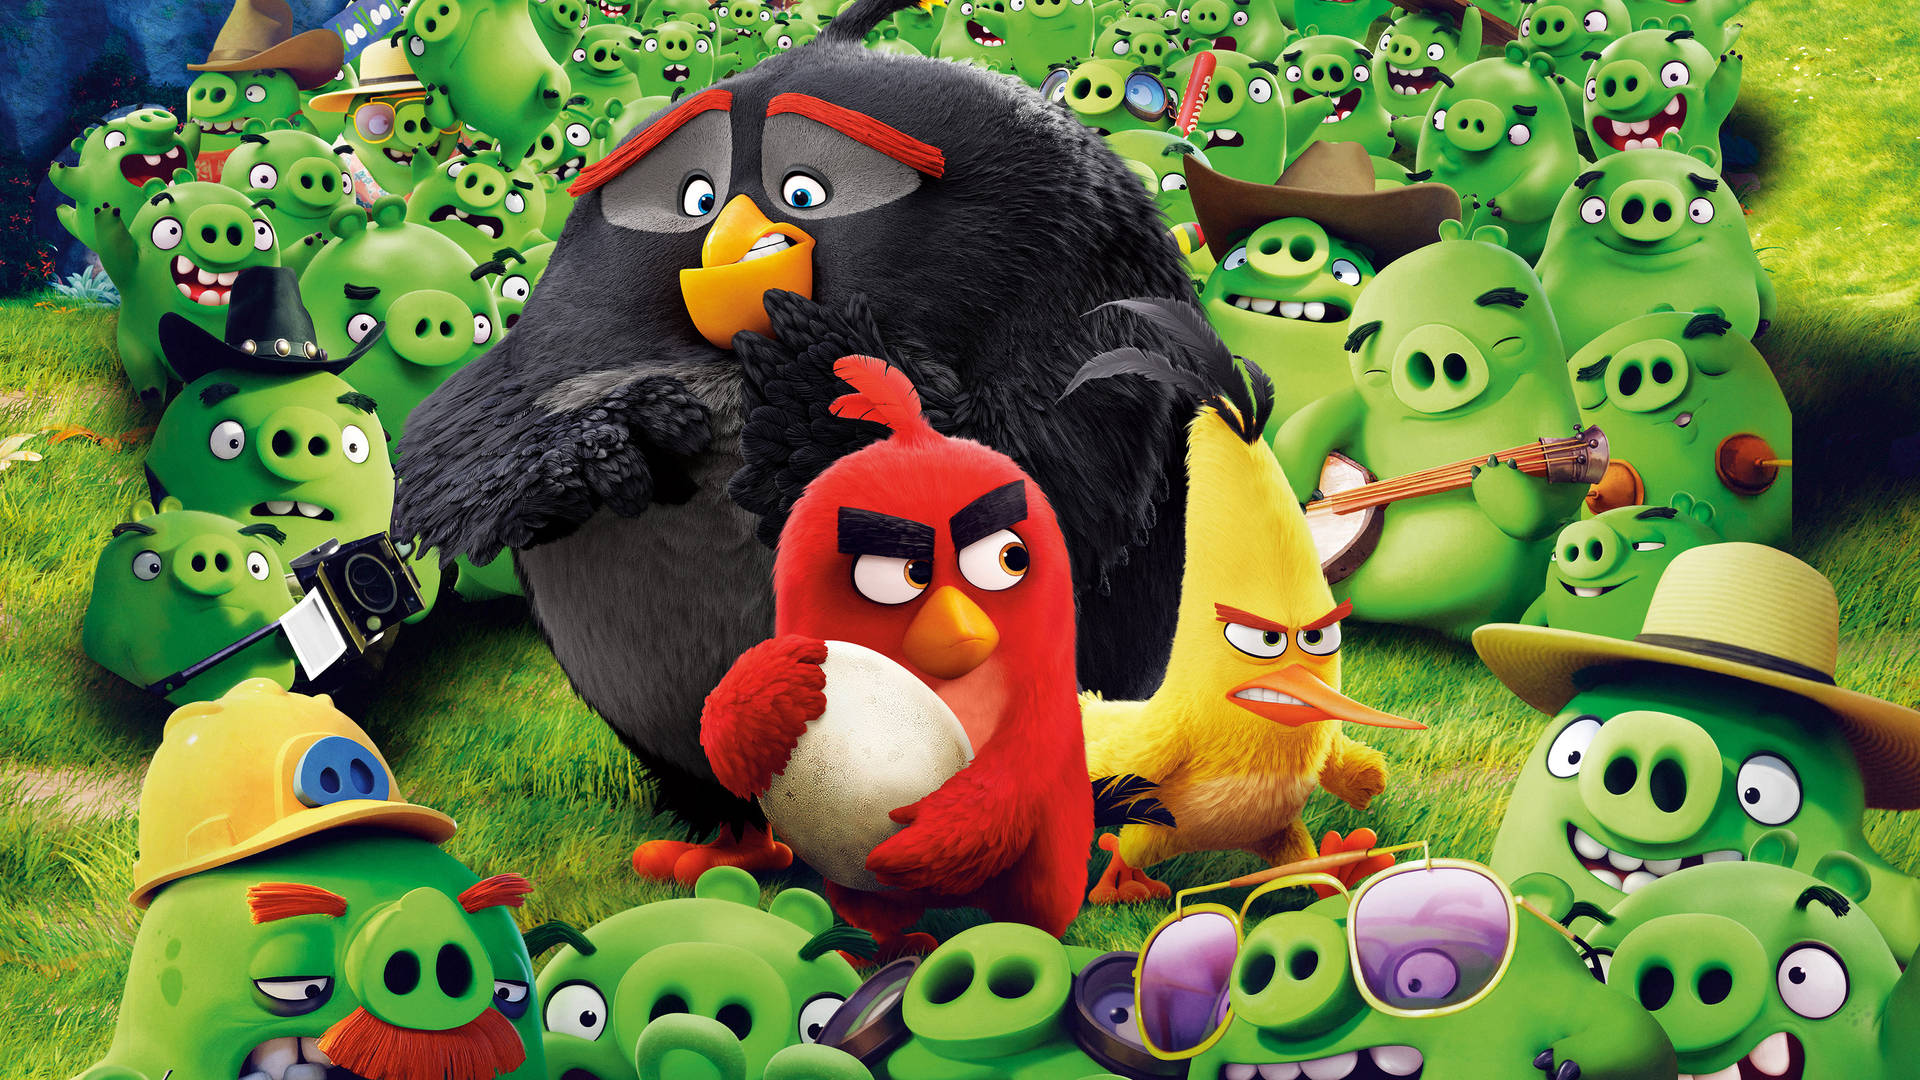 Fight Scene From The Angry Birds Movie Wallpaper